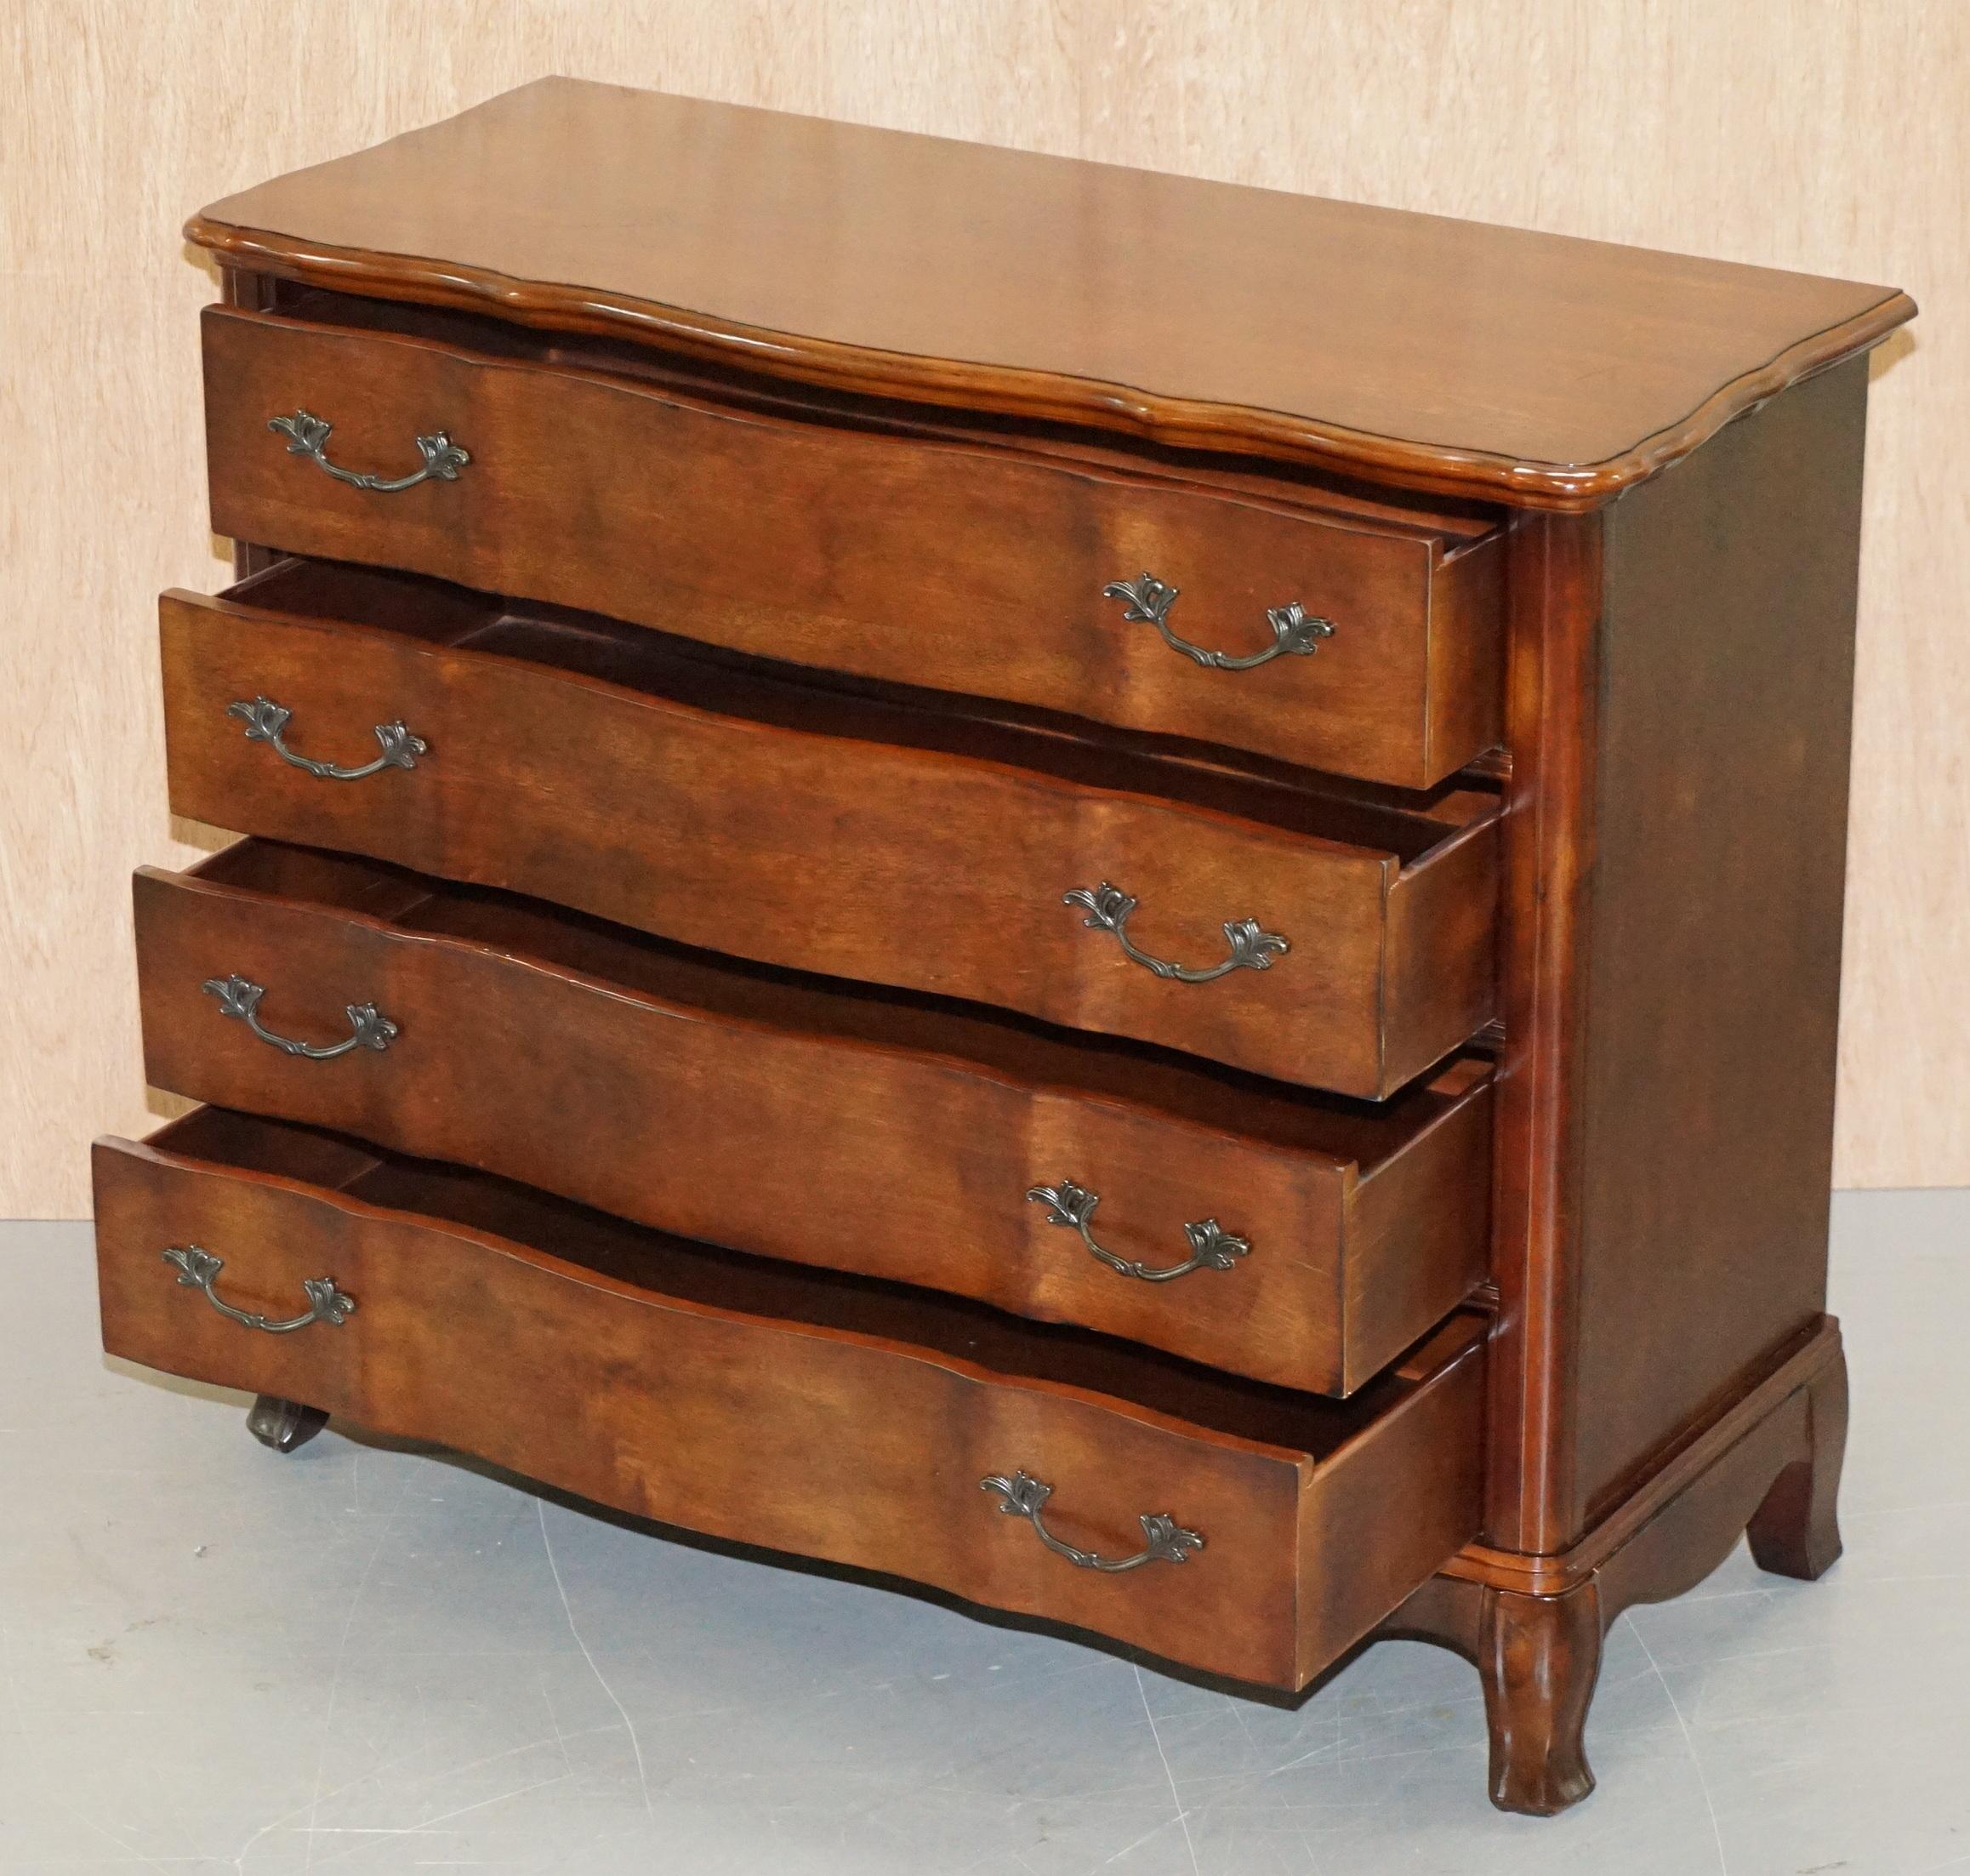 Larger Serpentine Fronted Ralph Lauren American Hardwood Chest of Drawers 13